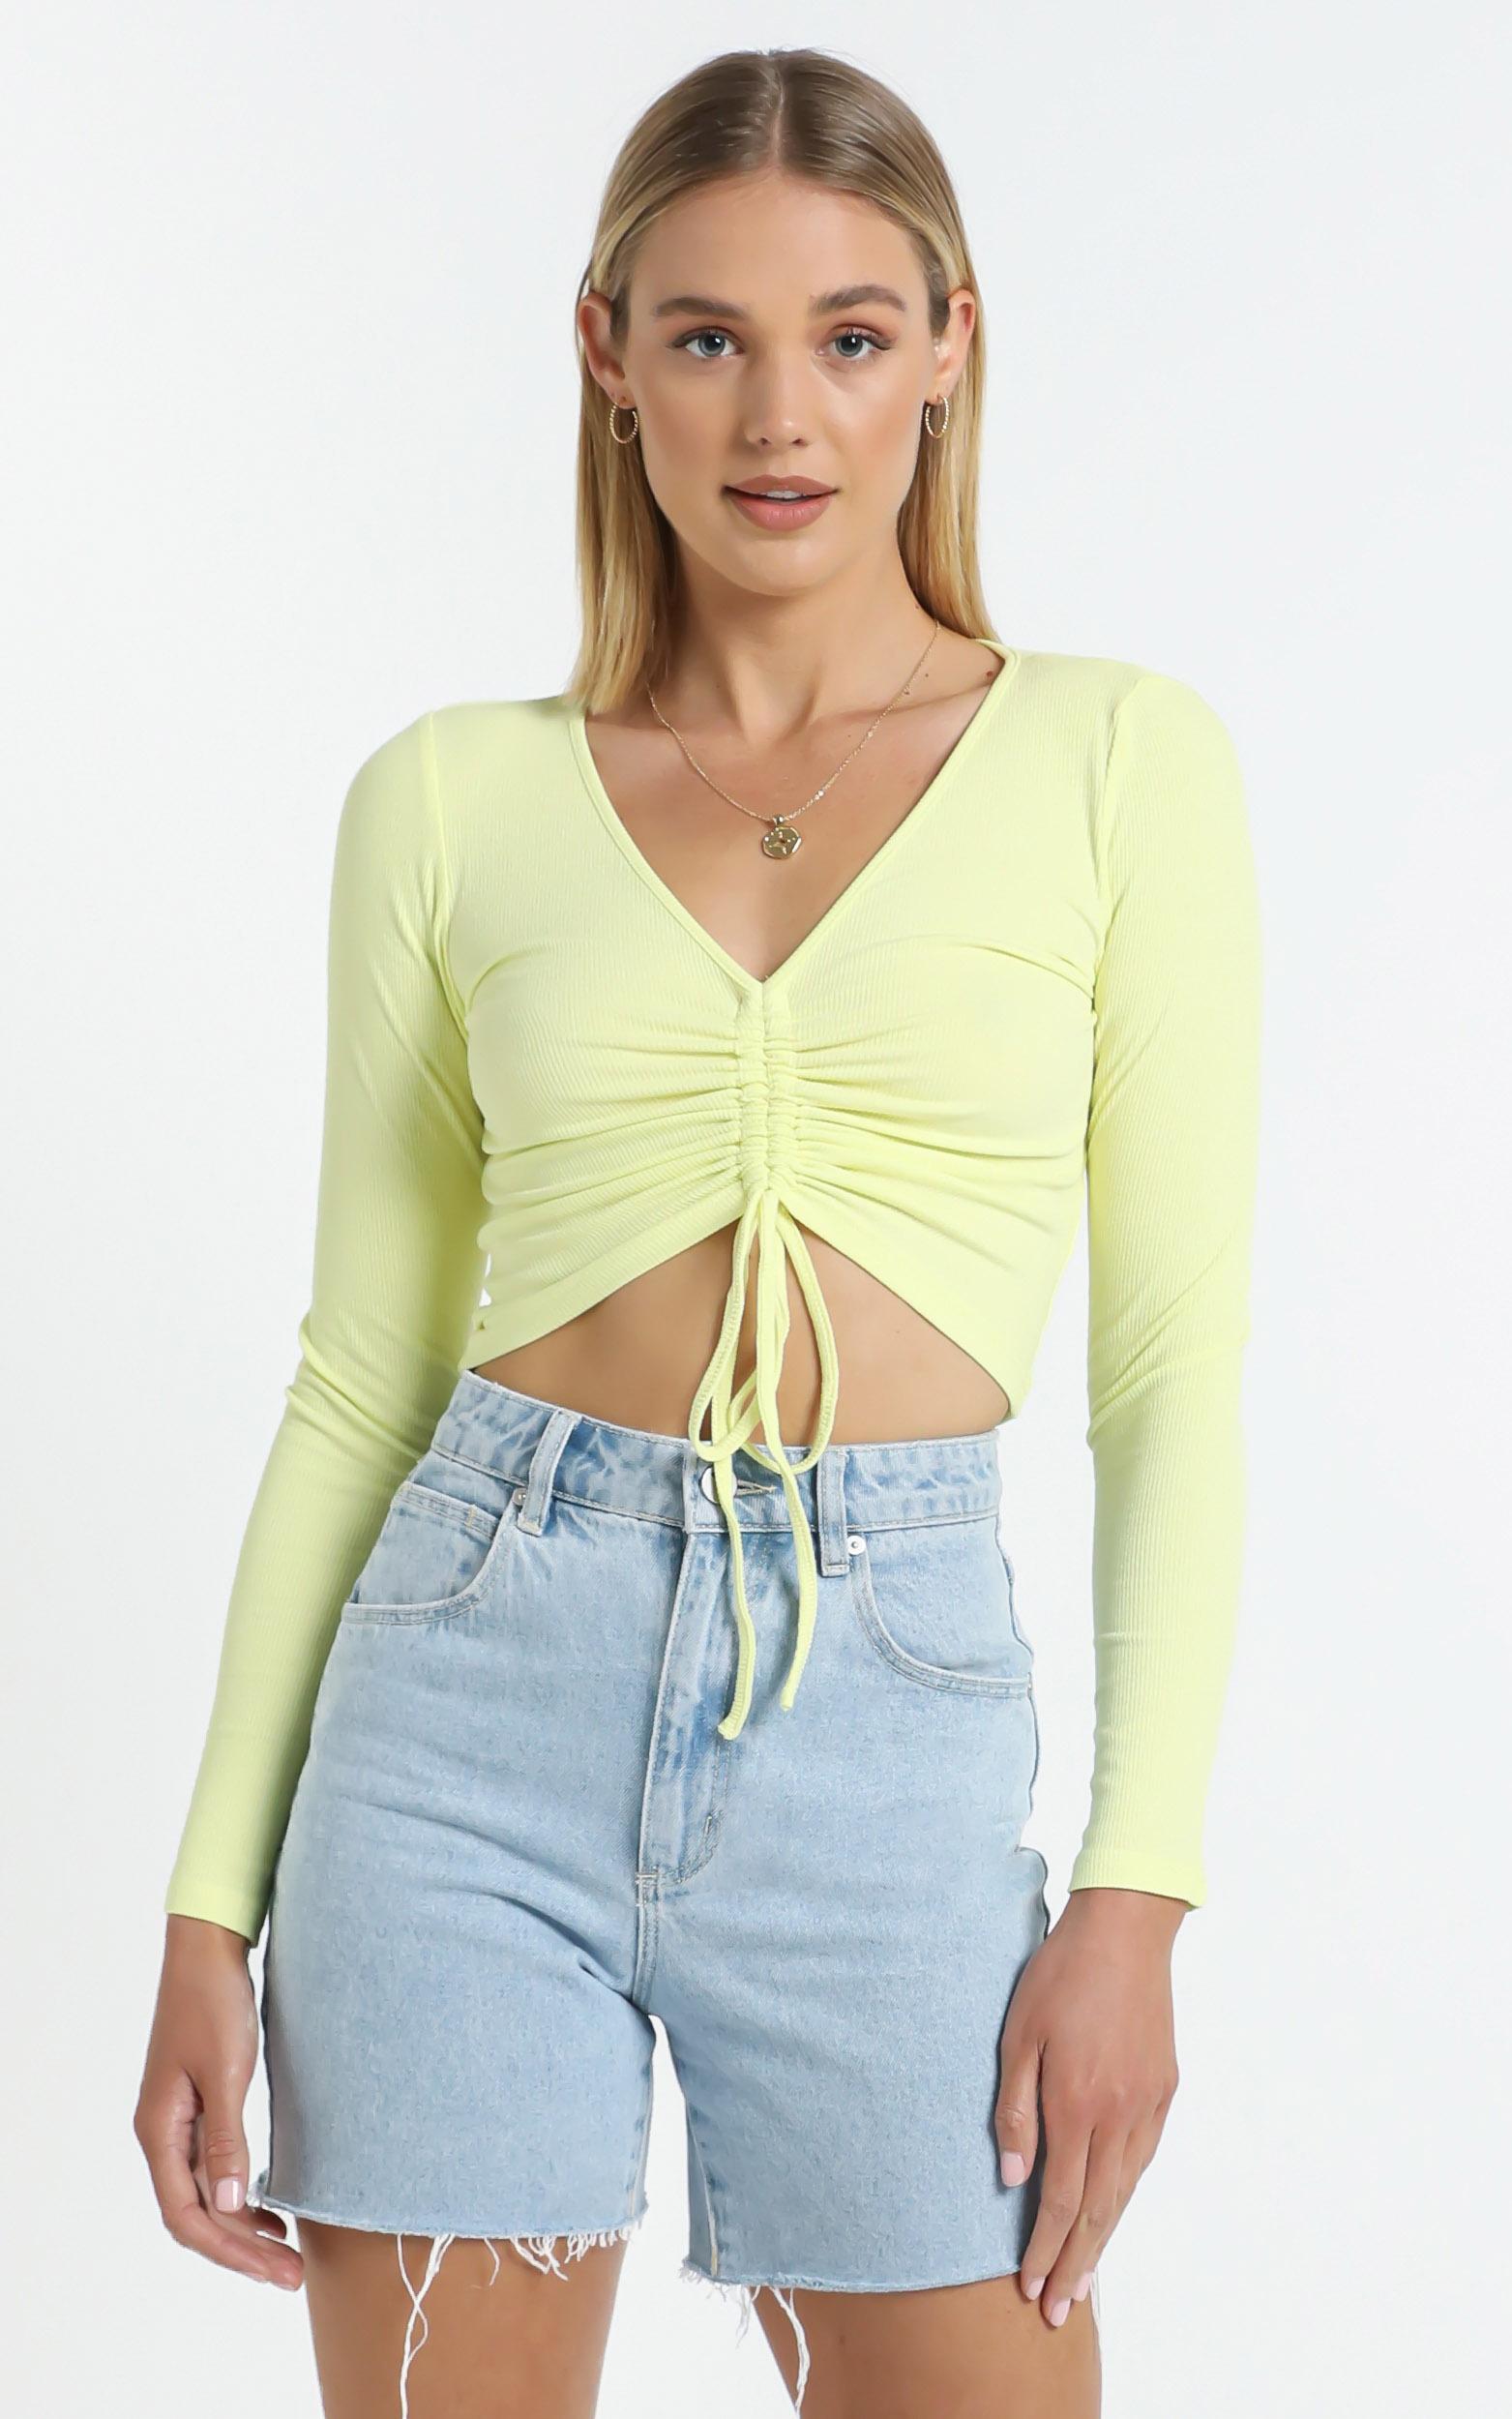 Eleanora Top in Pastel Yellow - 6 (XS), Yellow, hi-res image number null